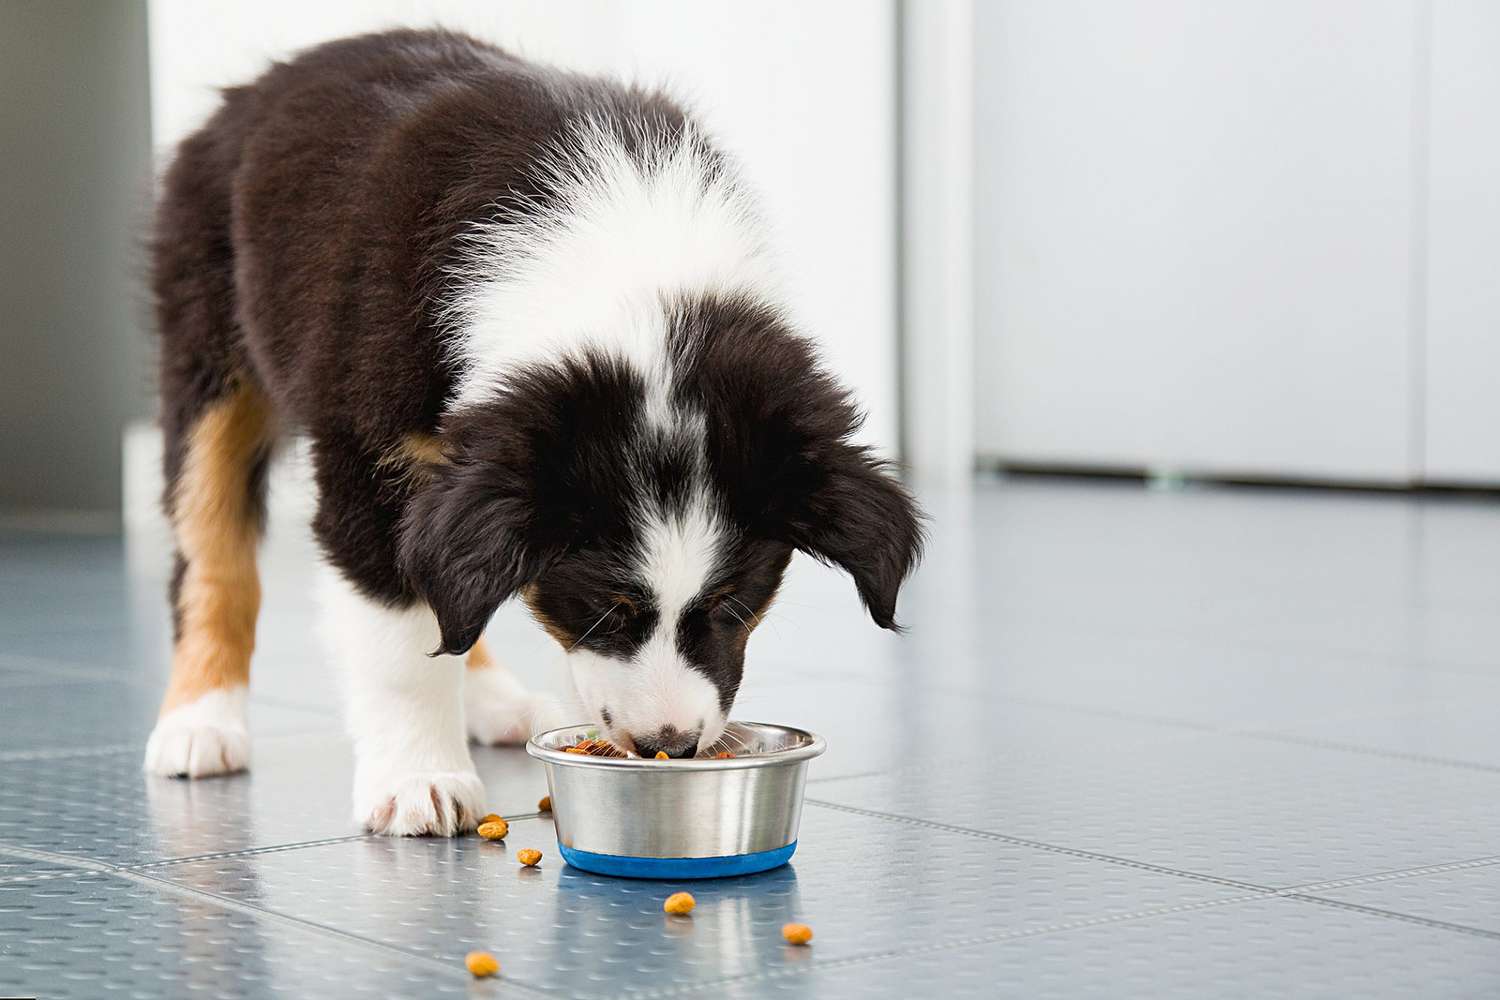 border collie puppy eating dog food from a bowl